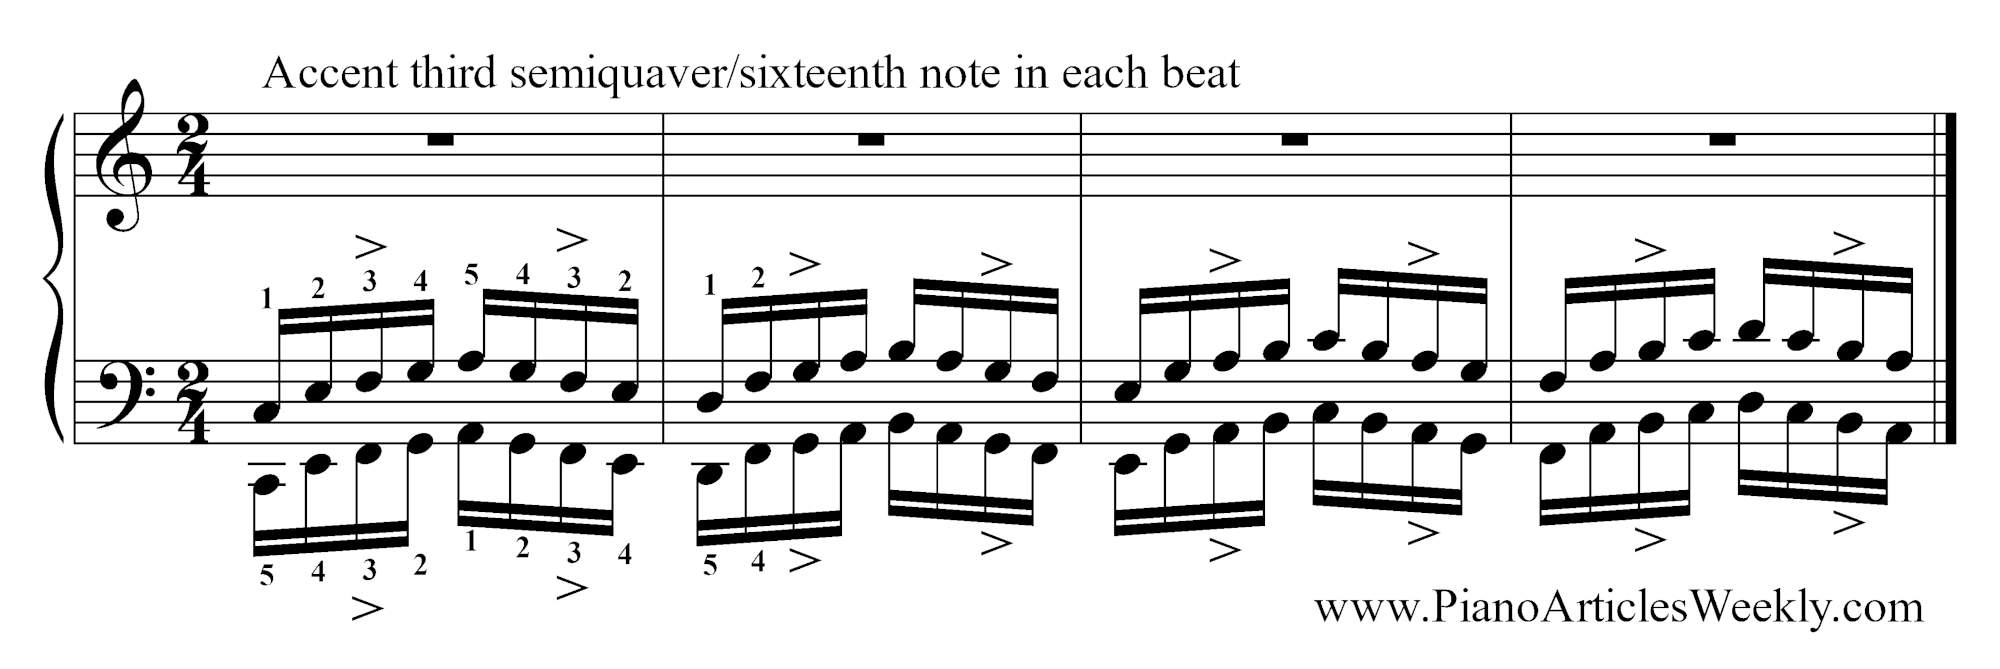 Hanon-Exercise-accent-third-semiquaver_sixteenth-note-in-each-beat